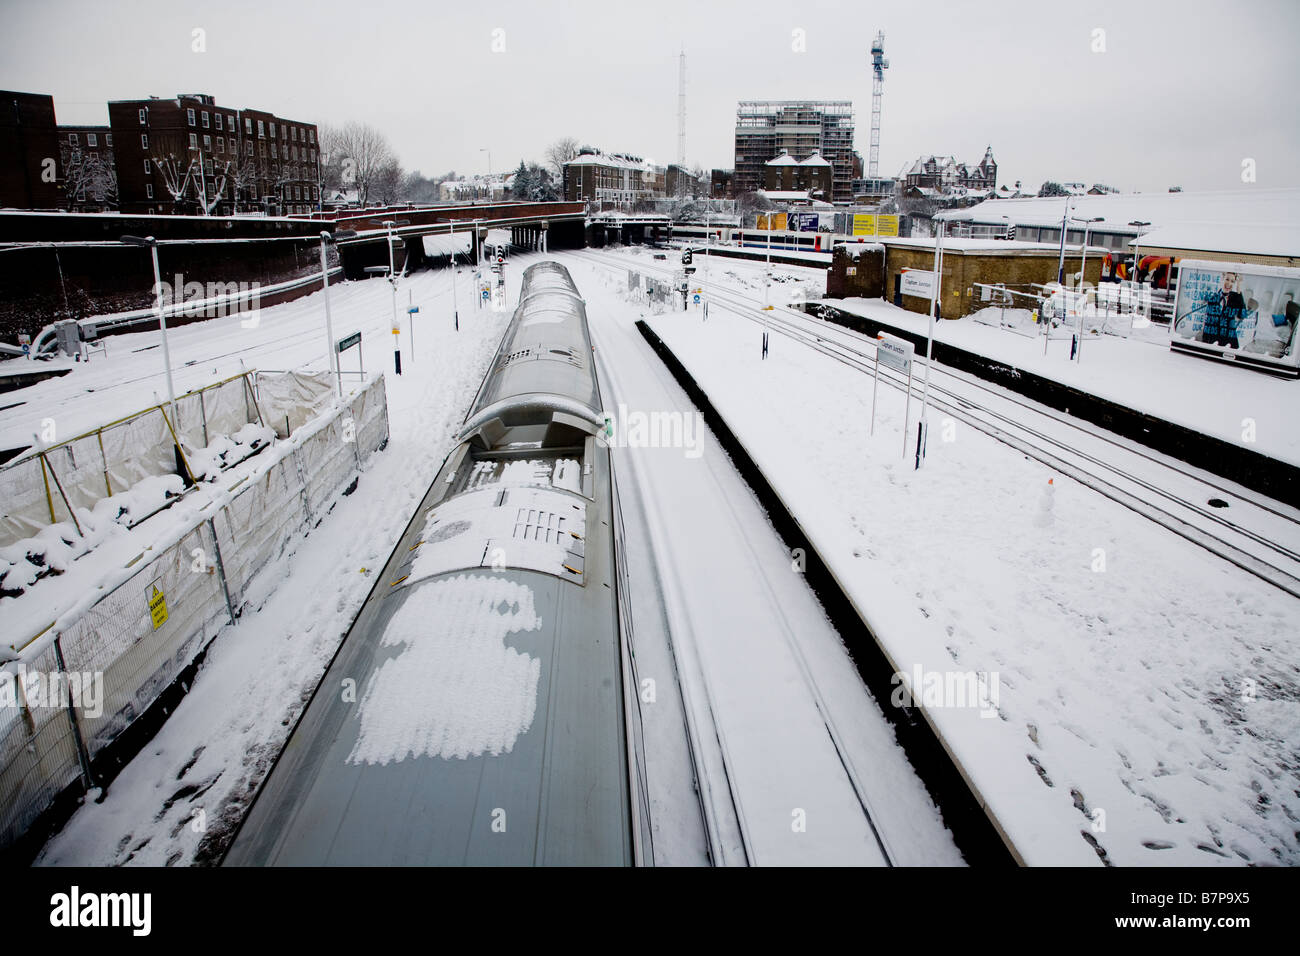 Snow And Train At Clapham Junction Station Stock Photo